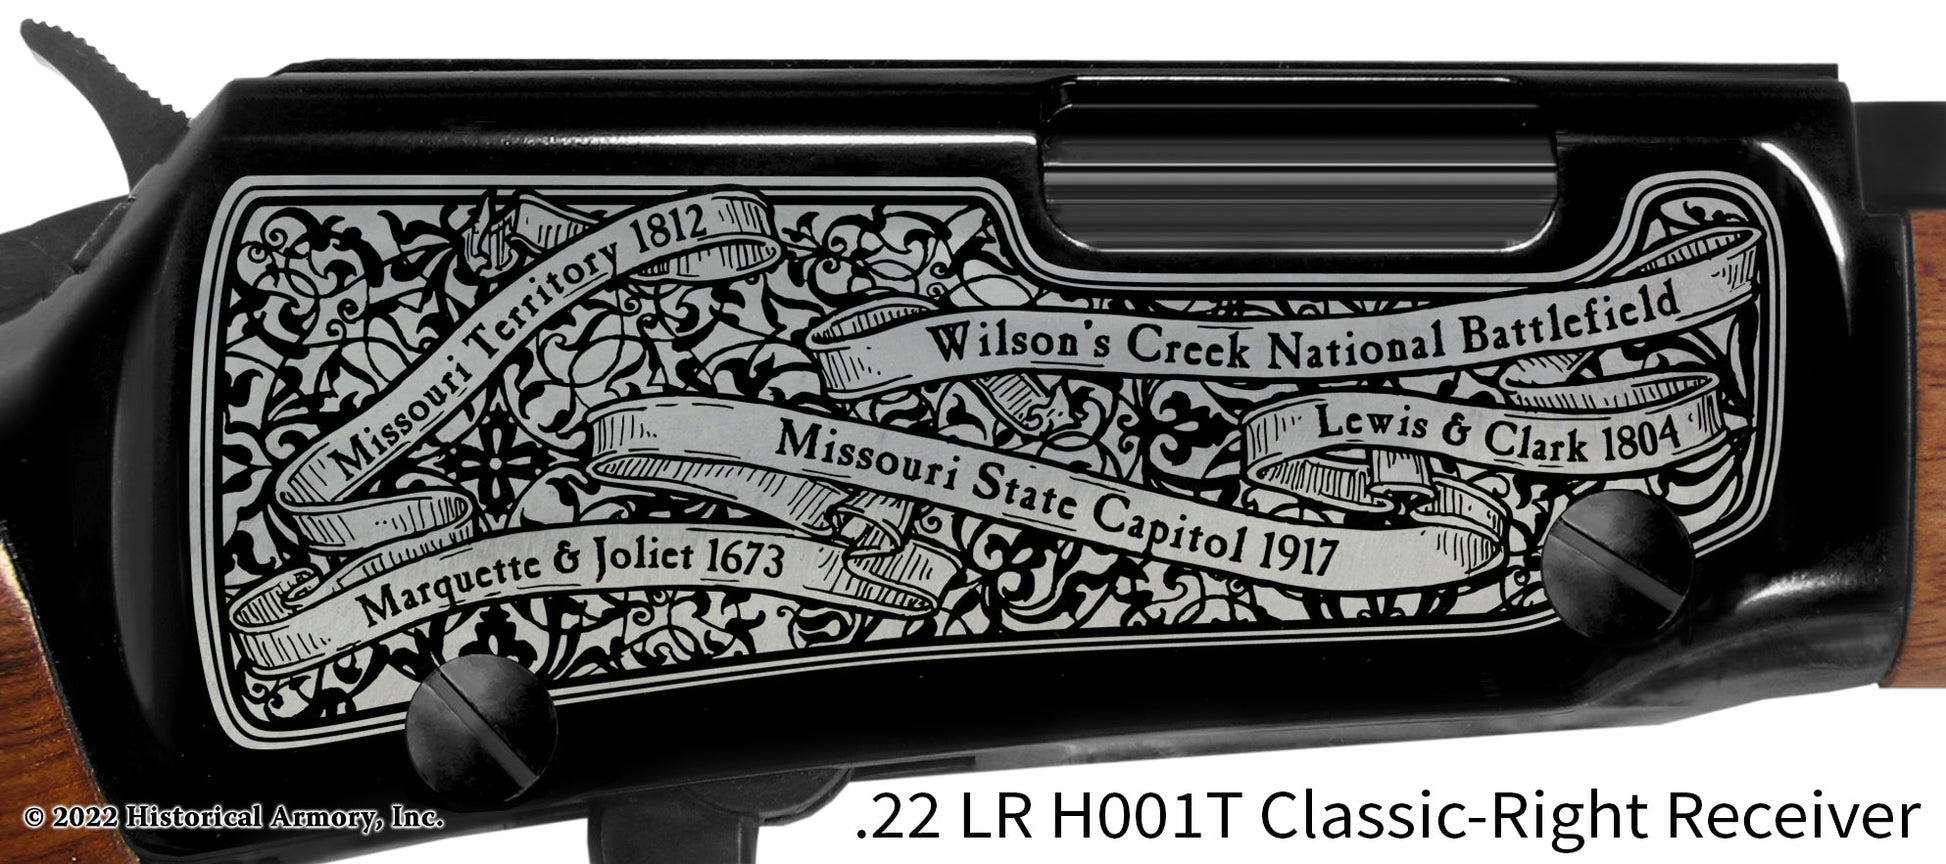 Missouri State Pride Engraved H00T Receiver detail Henry Rifle